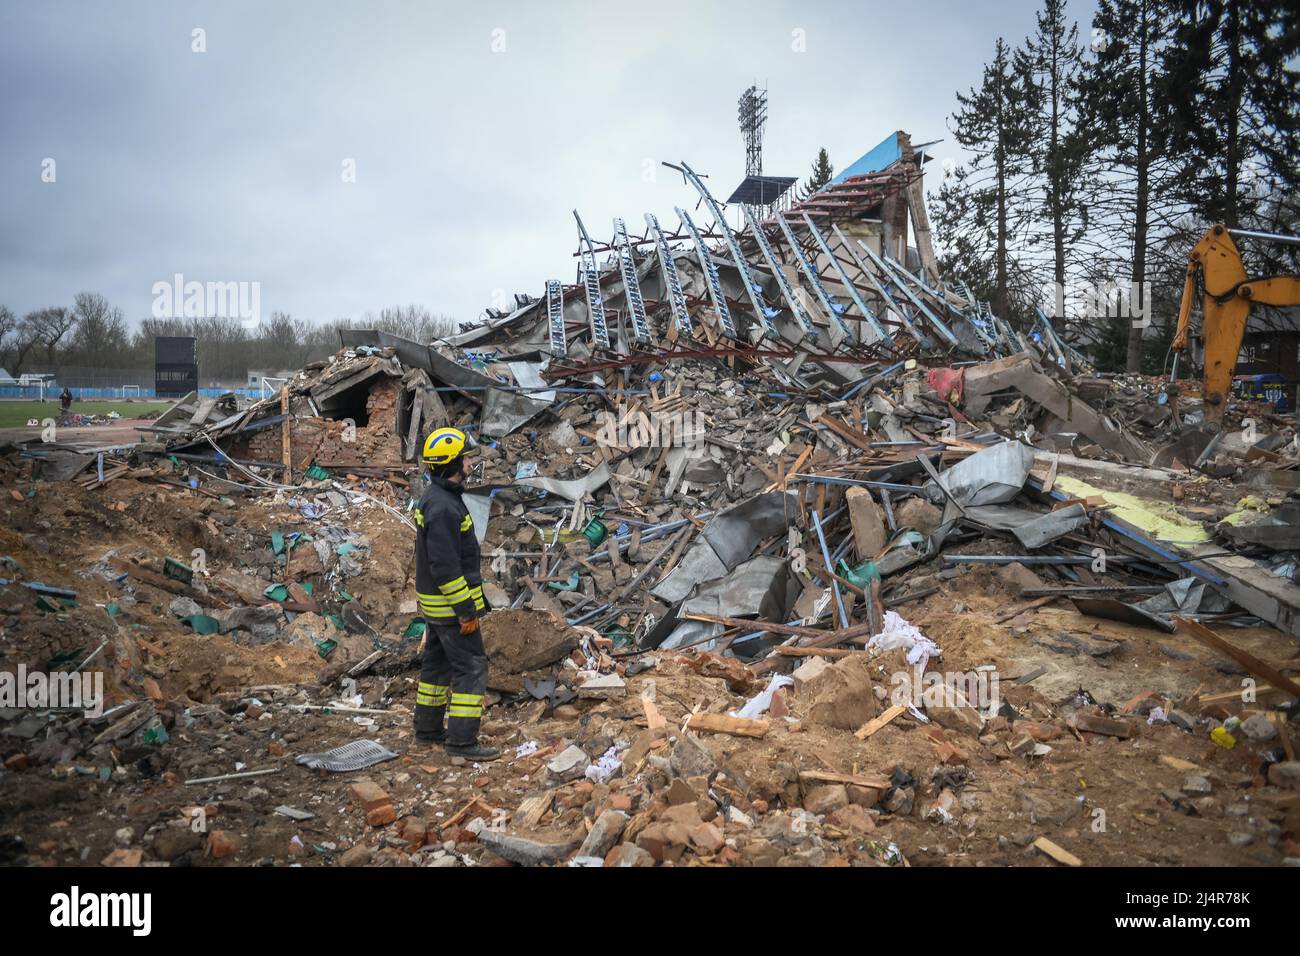 Ukraine. 16th Apr, 2022. A fire fighter works on rubbles in a football pitch at the stadium a residential area of Chernihiv, Ukraine damaged by shelling during the Russian invasion on April 16, 2022. Russian military forces entered Ukraine territory on Feb. 24, 2022. (Photo by Piero Cruciatti/Sipa USA) Credit: Sipa USA/Alamy Live News Stock Photo